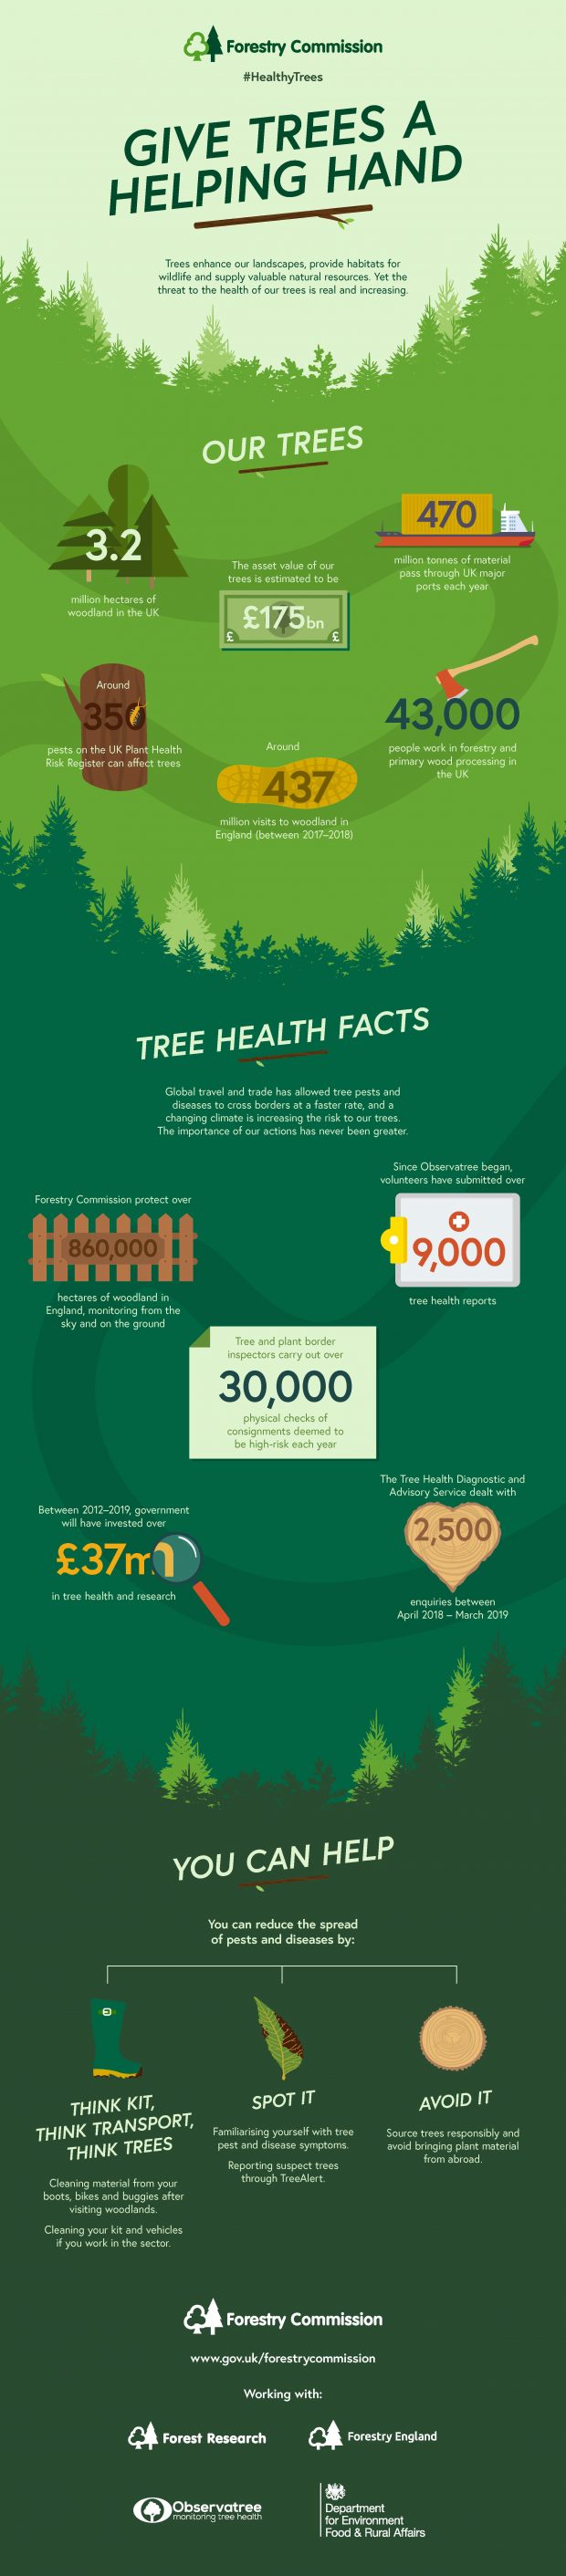 Give Trees A Helping Hand - Infographic - Forestry Commission